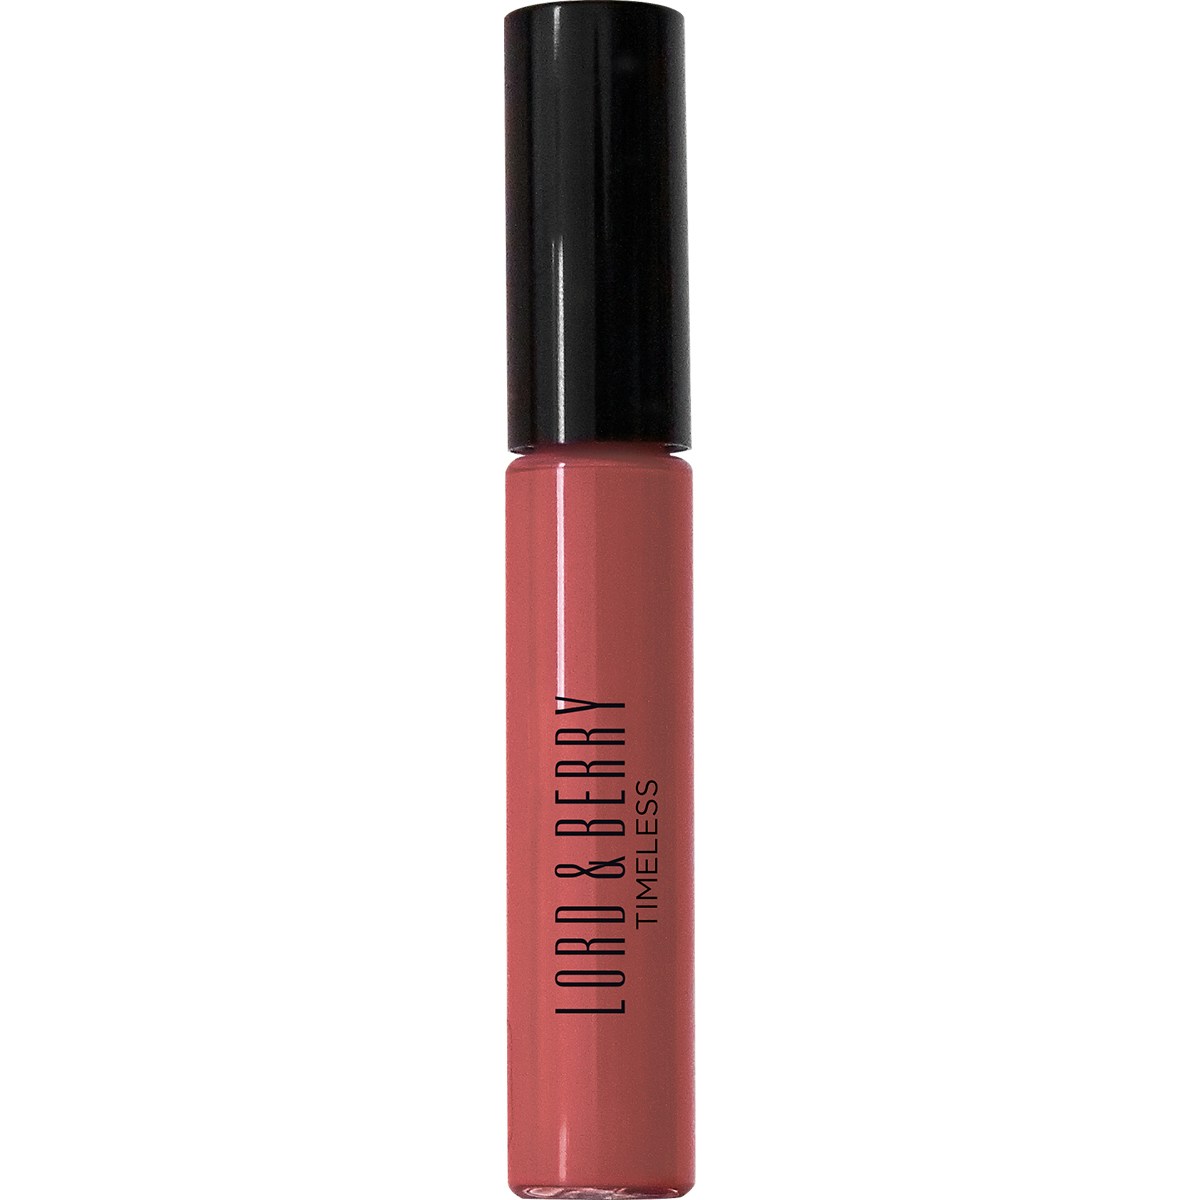 Lord & Berry Lips Lord and Berry Timeless Kissproof Lipsticks 7g Bazaar